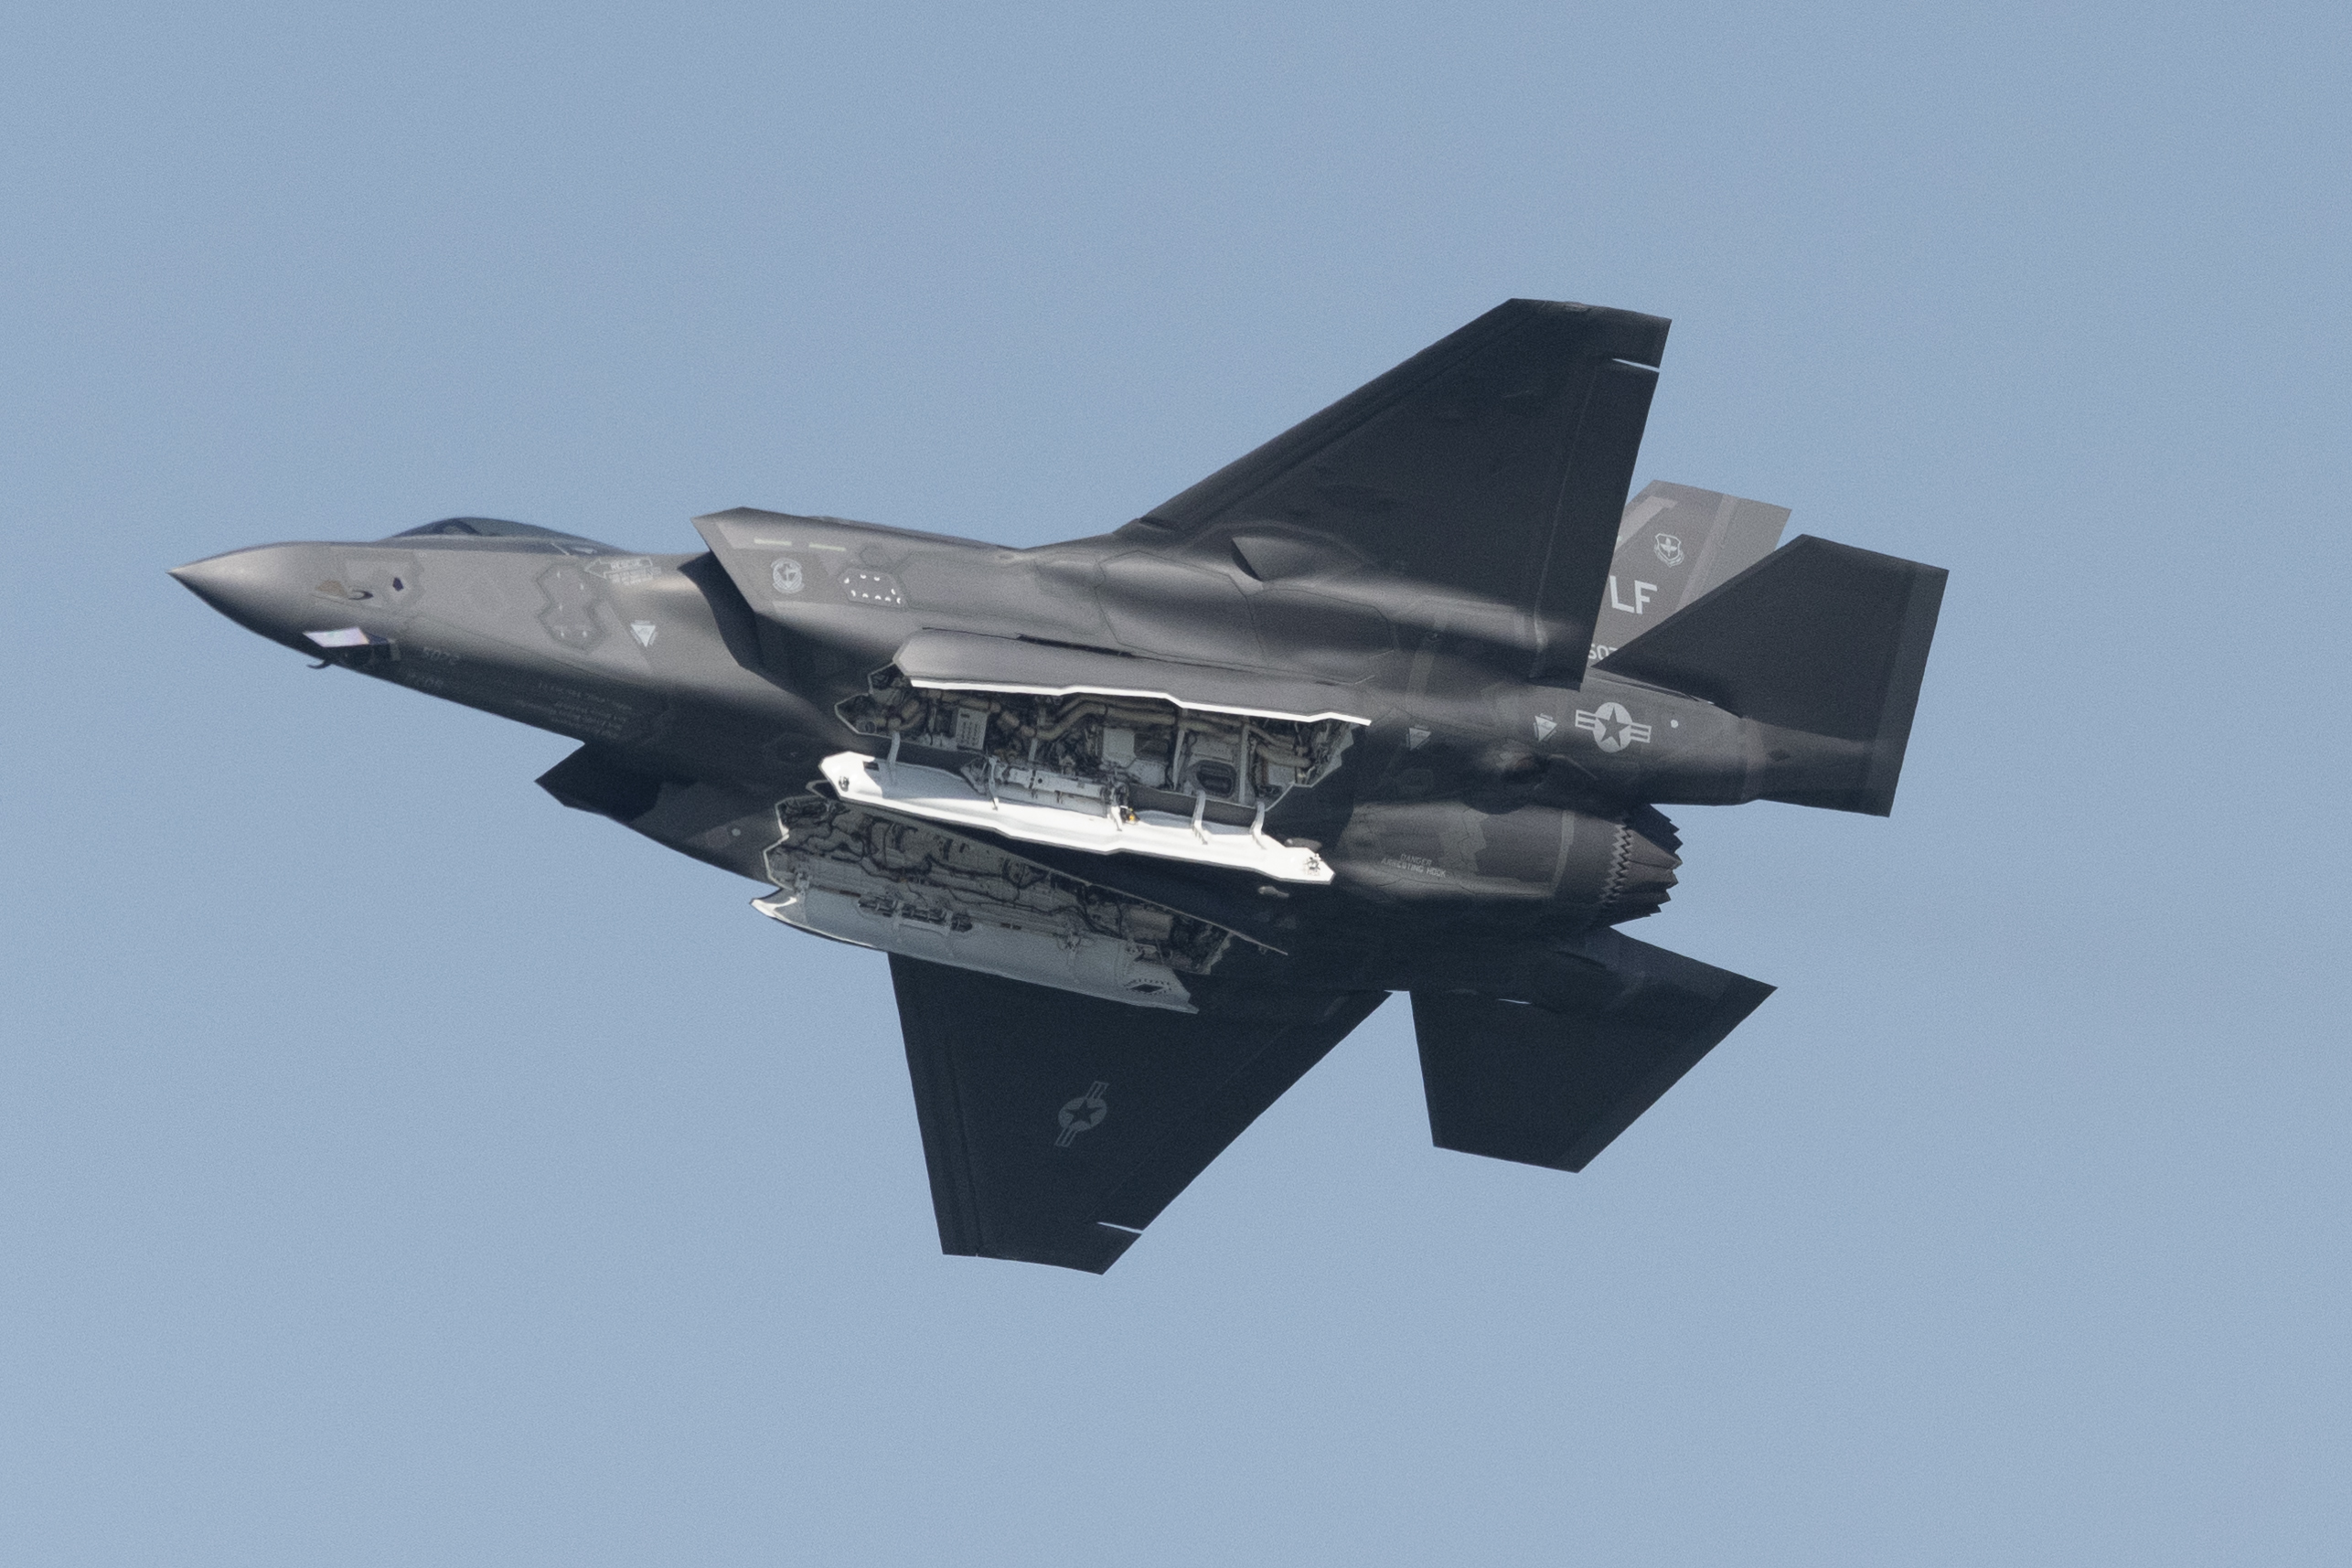 U.S. Military Asks for Help Finding Missing F-35 Fighter Jet